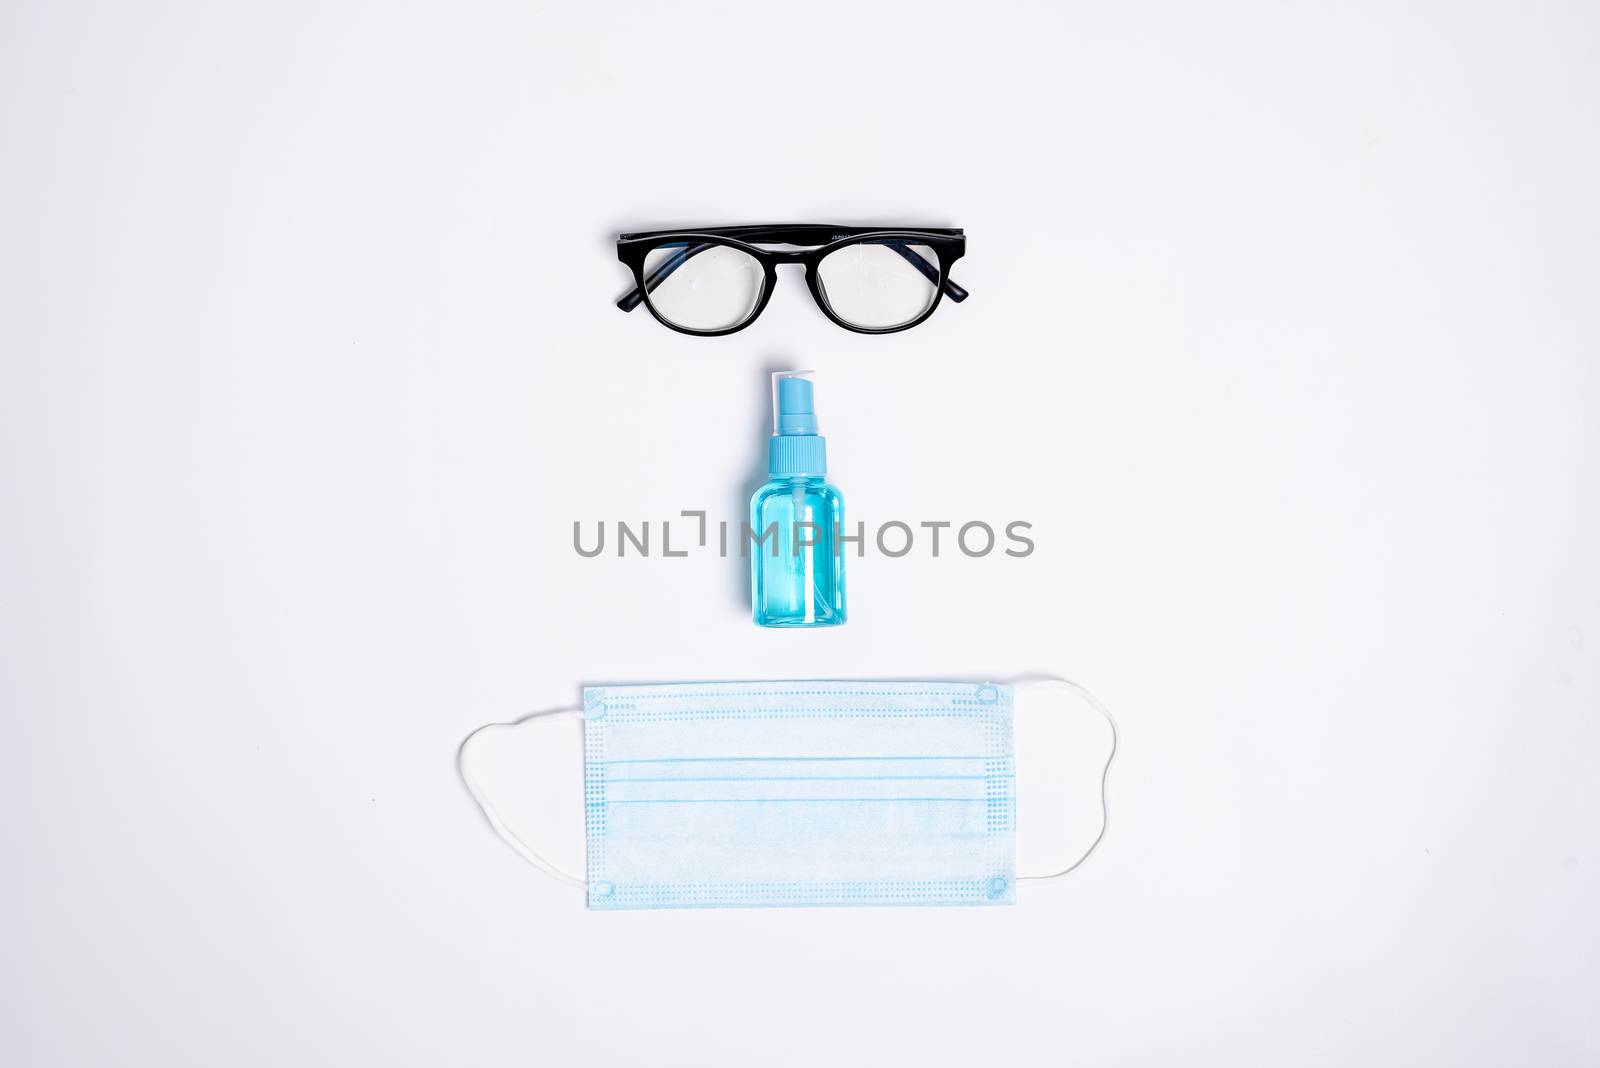 The face of equipment to protect COVID-19, eyeglasses, blue mask by animagesdesign